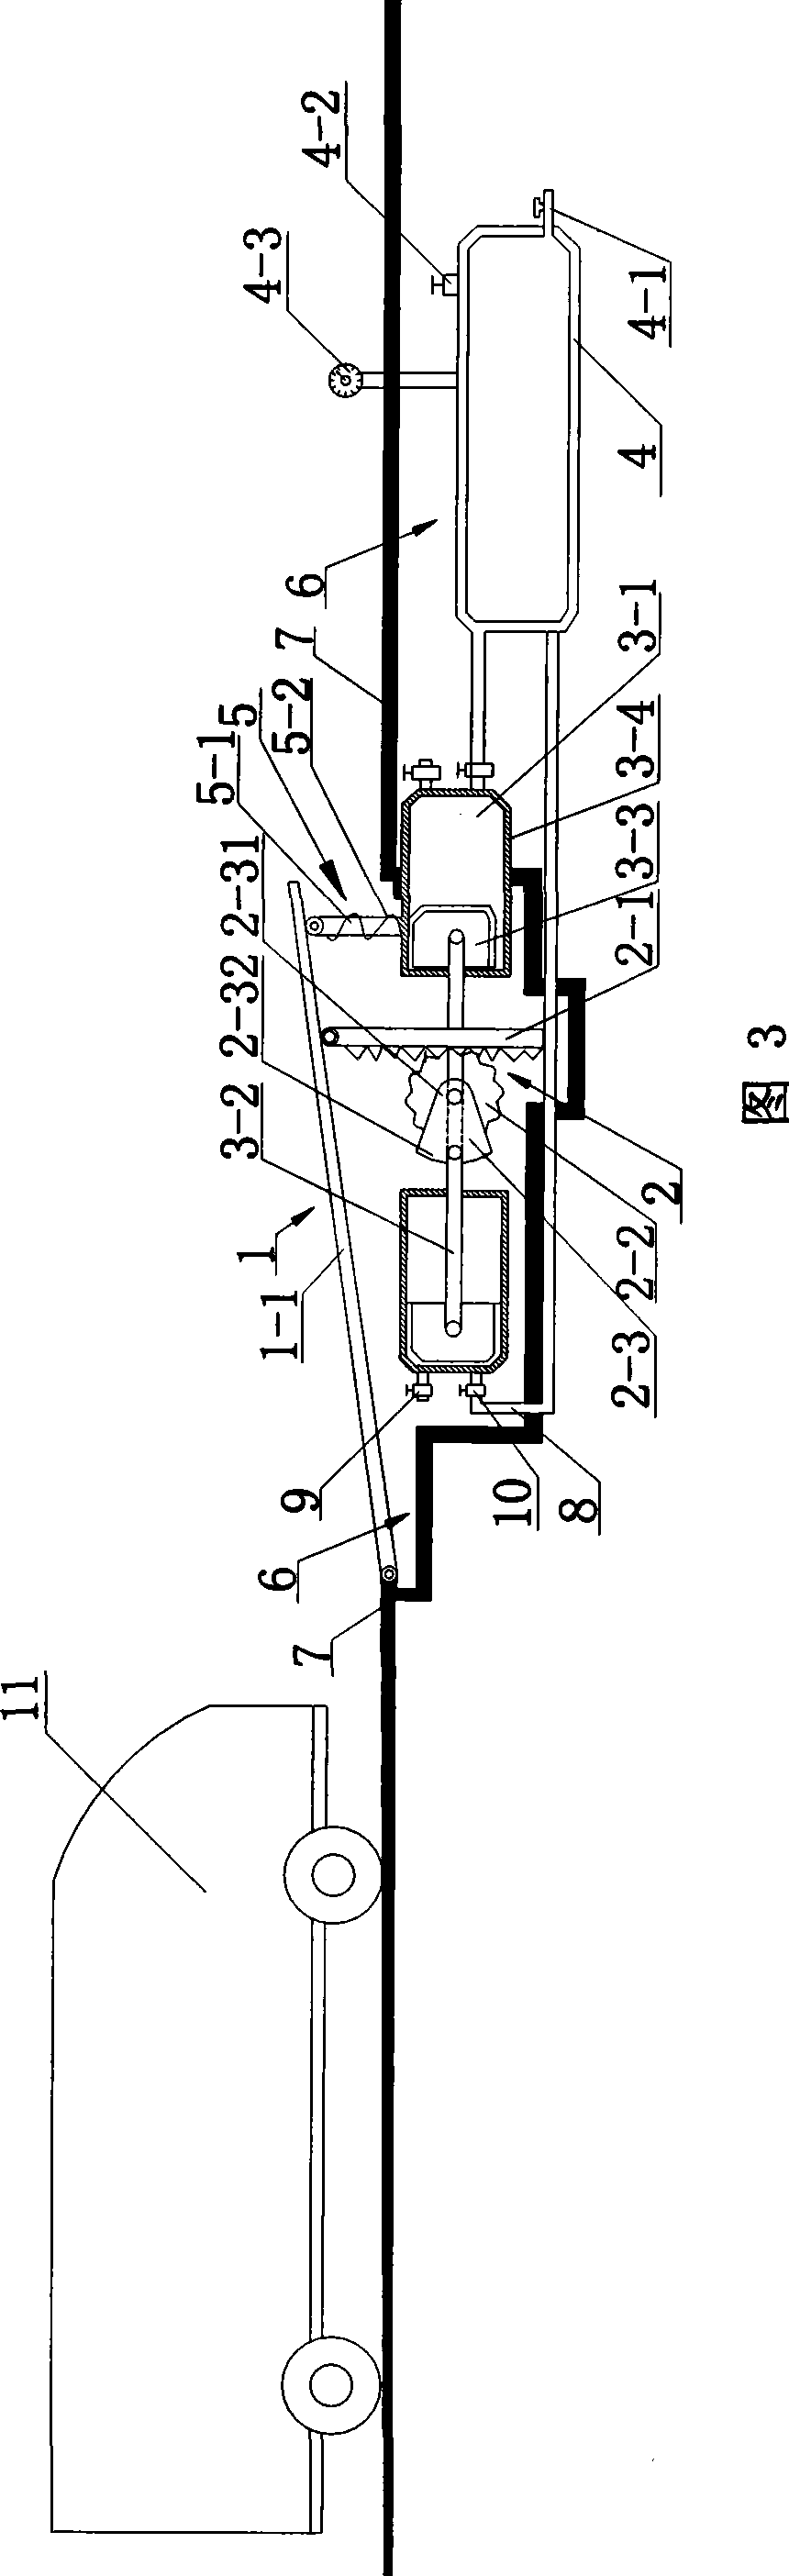 Apparatus for collecting compressed air by ambient pressure